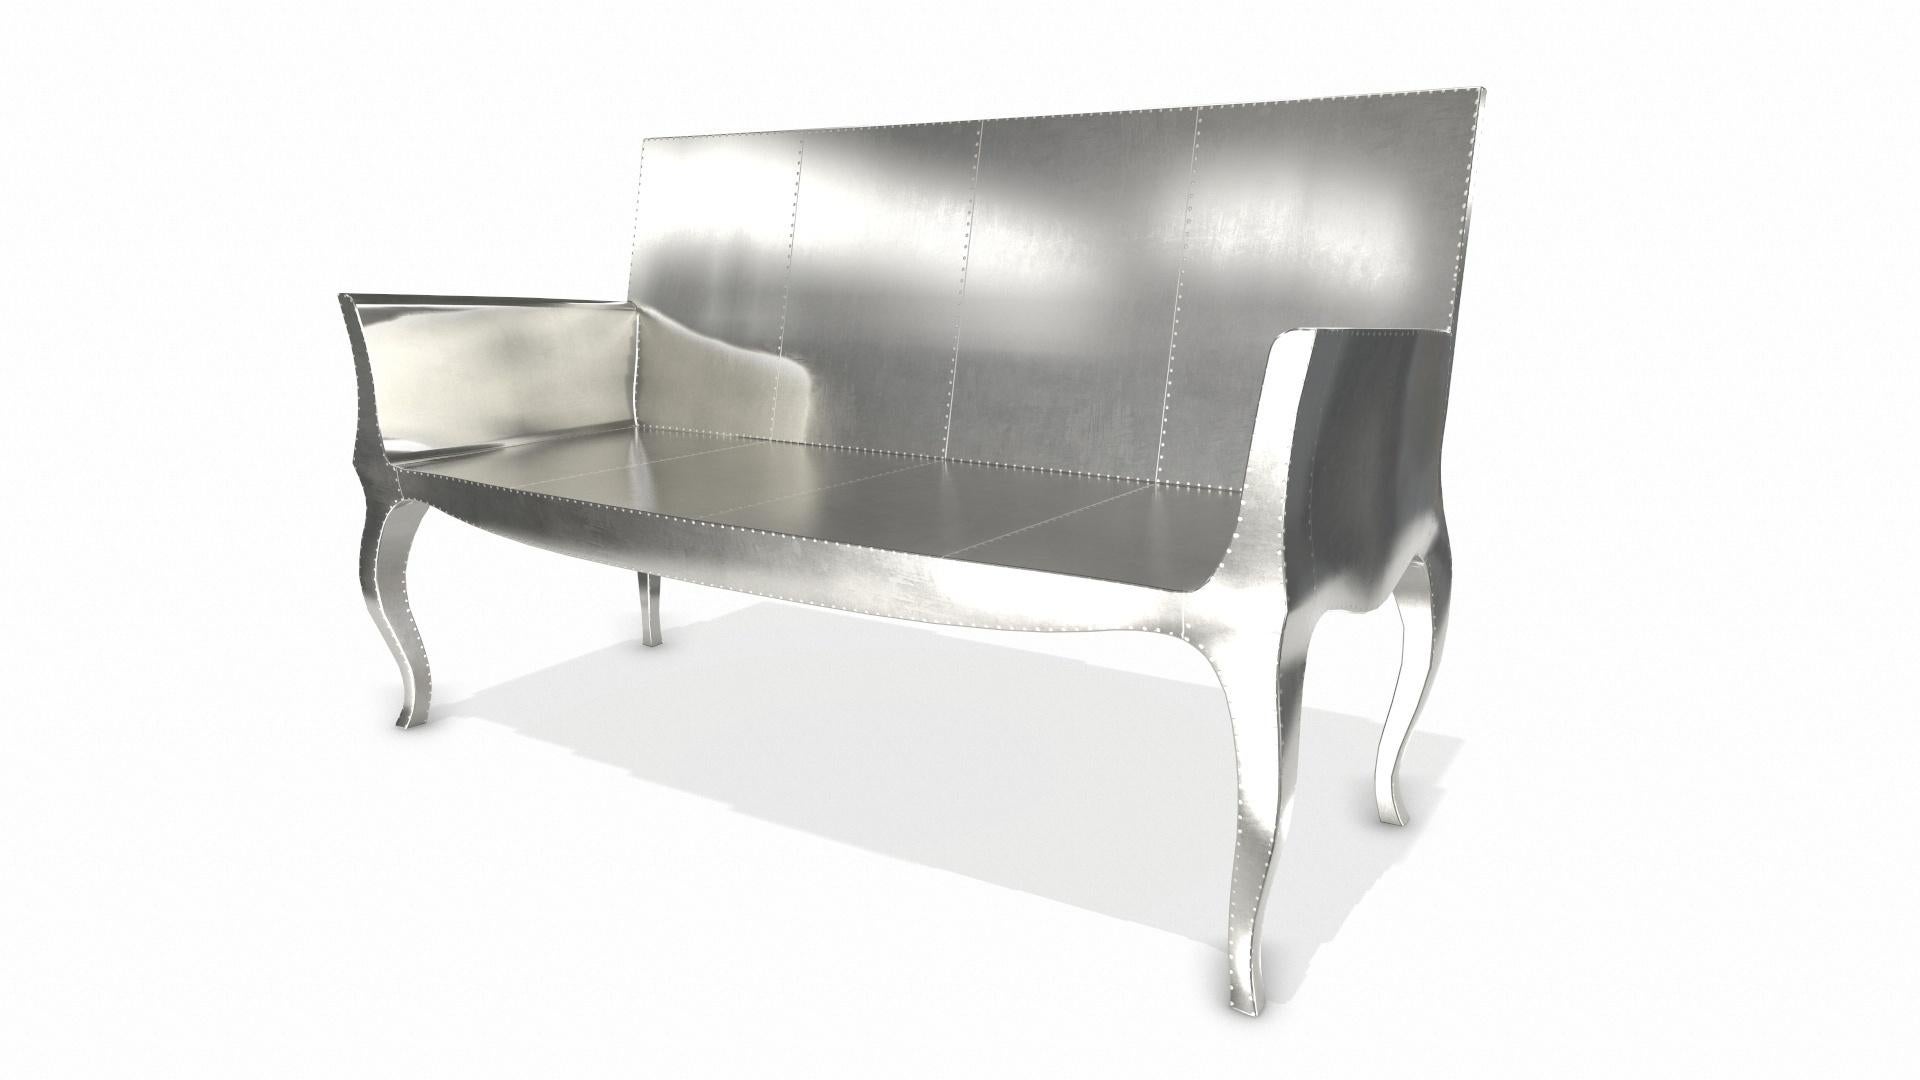 American Louise Settee Art Deco Benches in Smooth White Bronze by Paul Mathieu For Sale